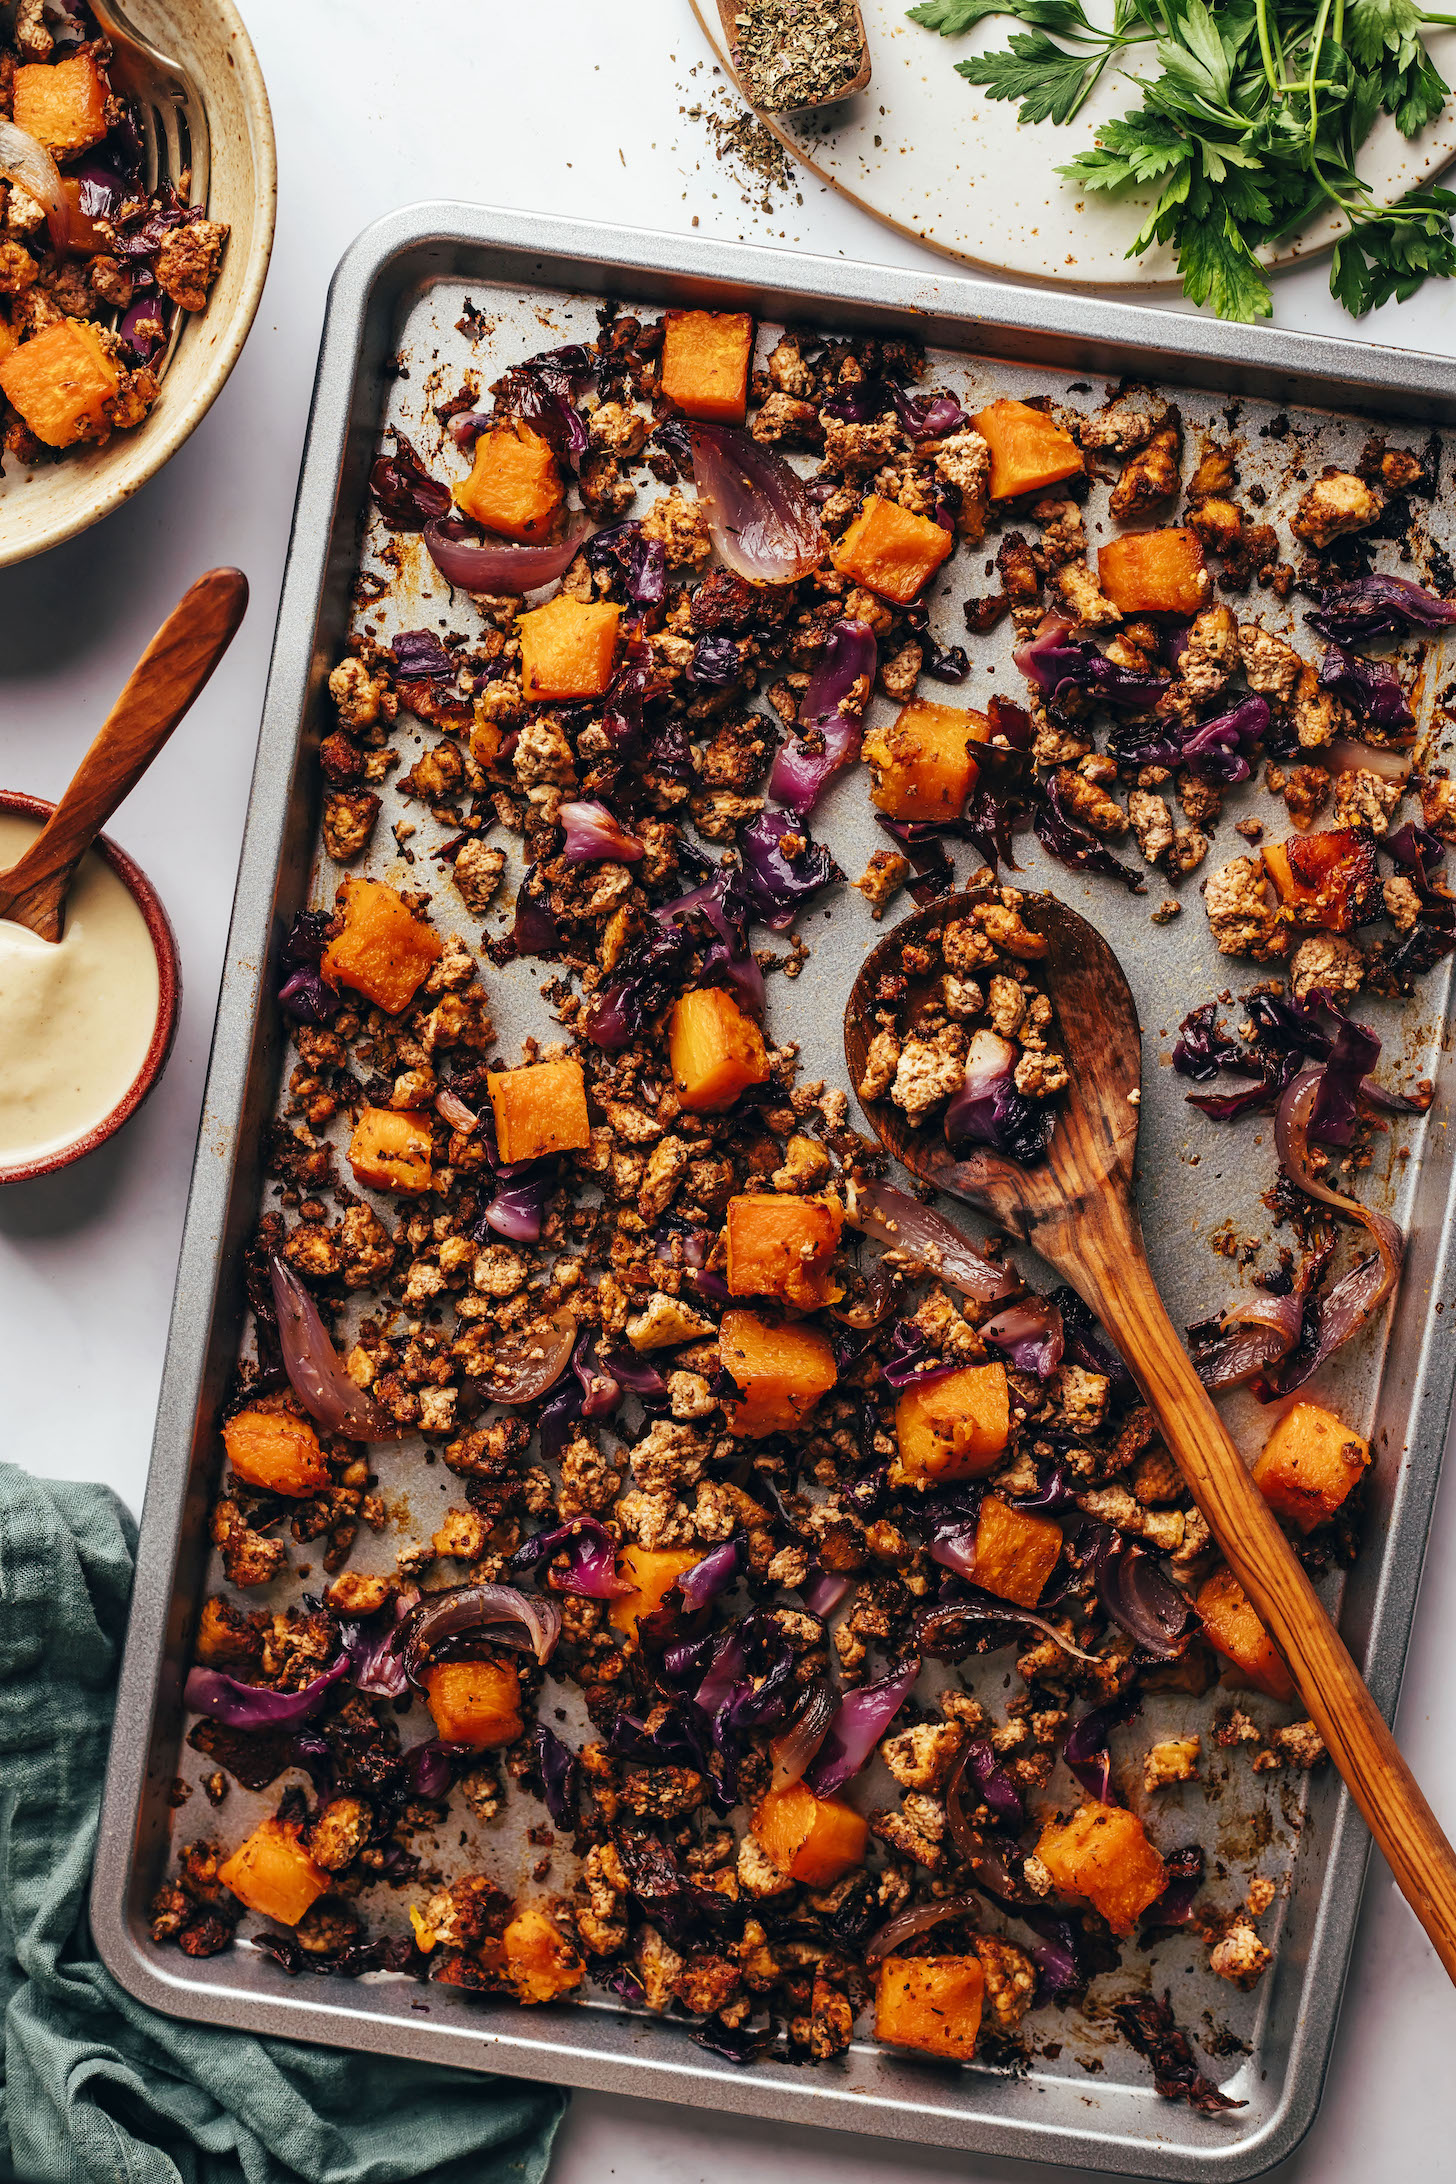 Caramelized roasted butternut squash, red onion, cabbage, and tofu on a baking sheet